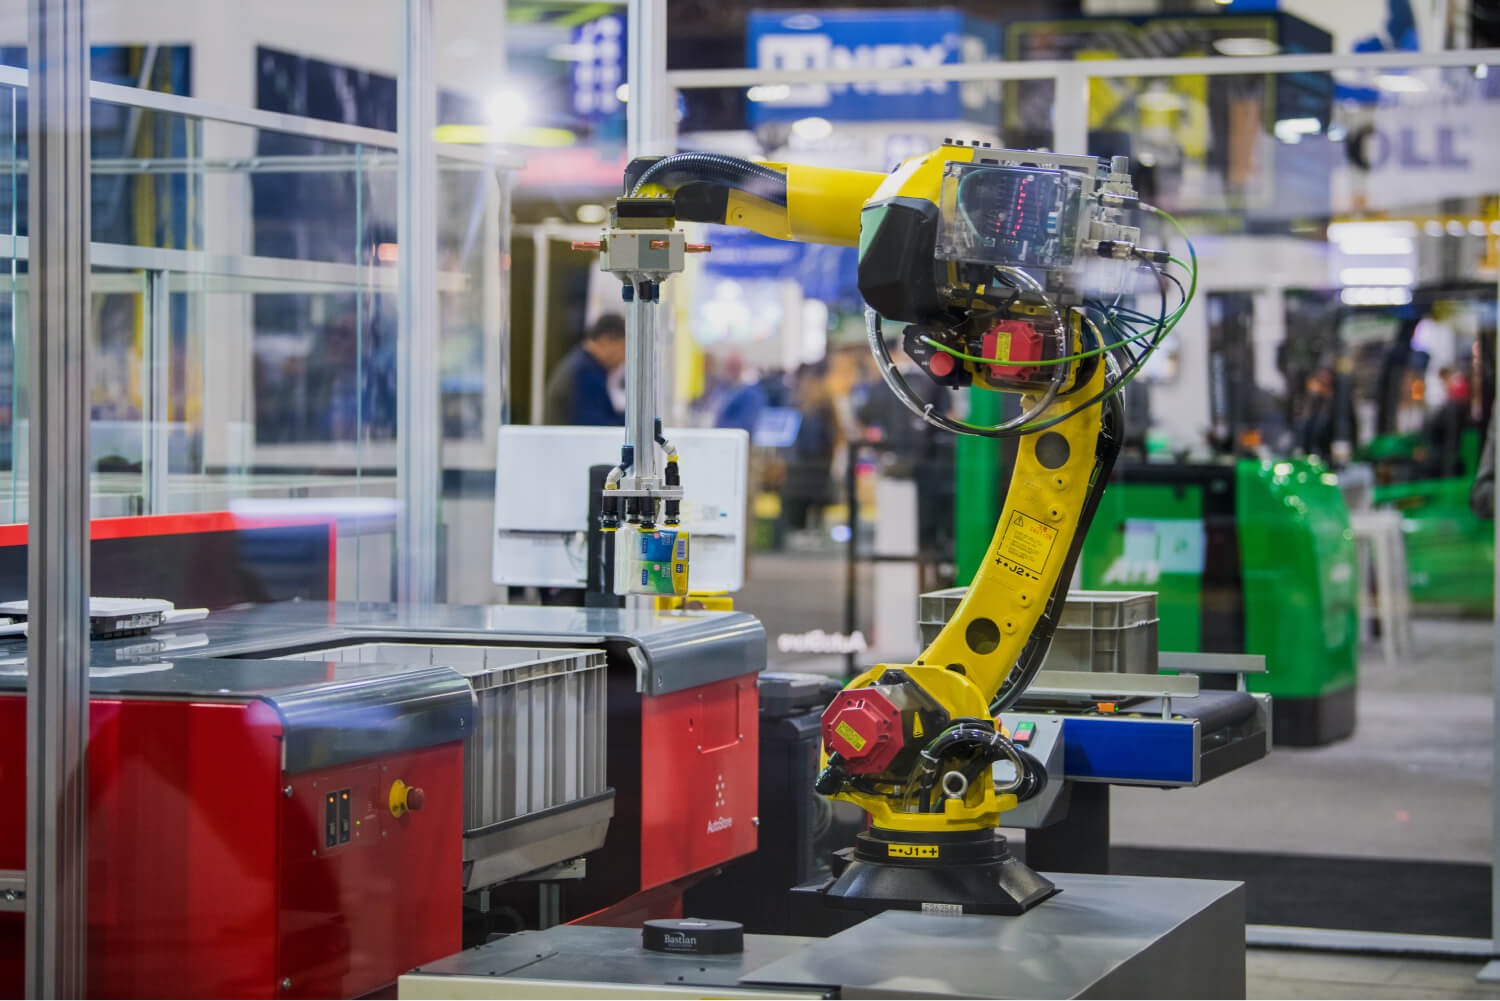 Warehouse Robots for Fulfillment Centers, Supply Chain eCommerce